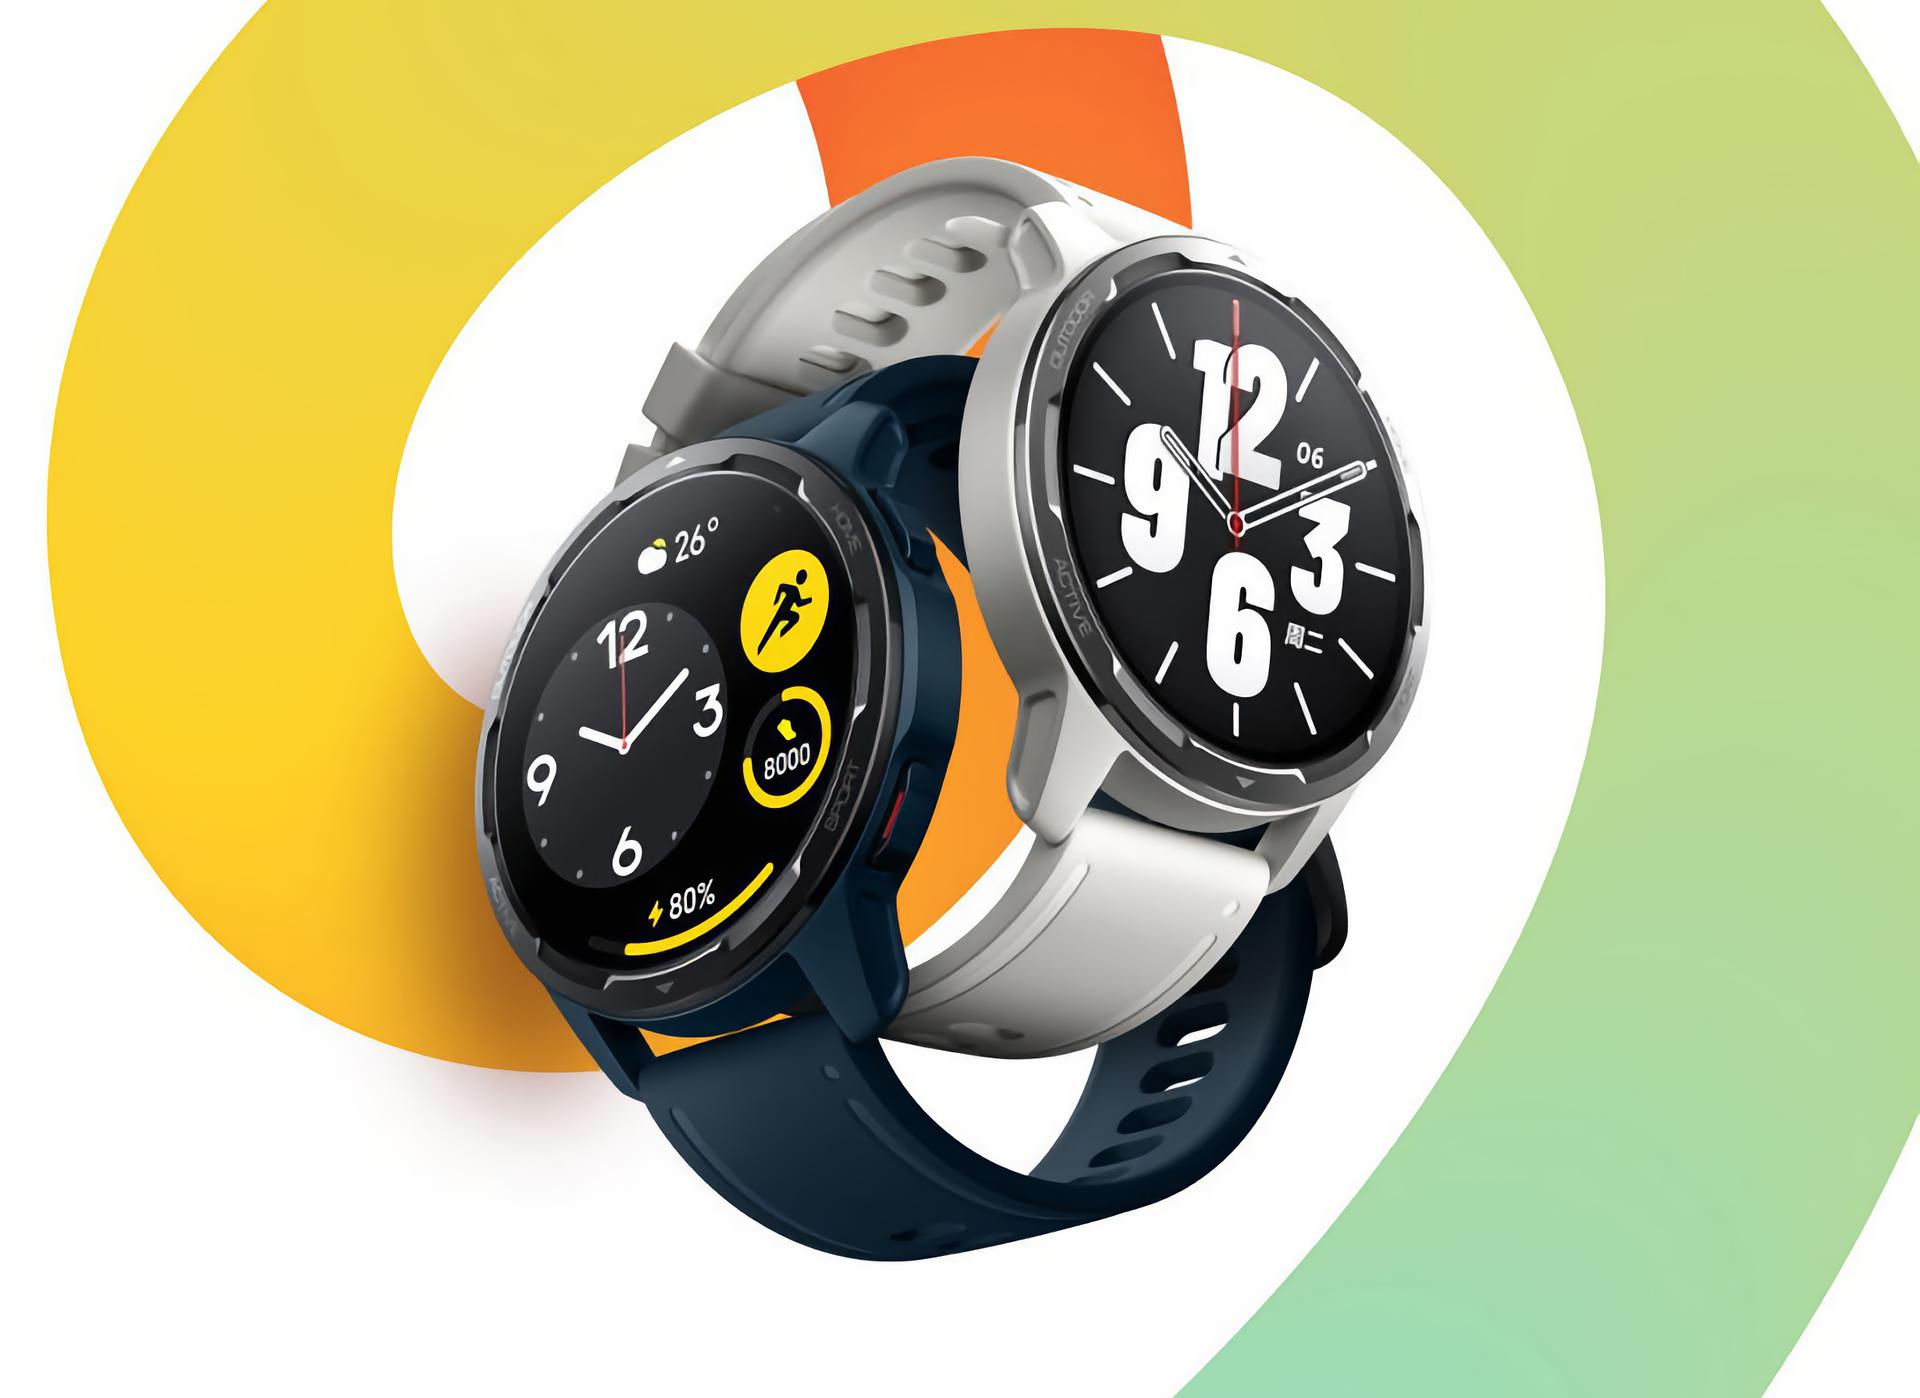 Xiaomi Watch Color 2: AMOLED screen, 117 sport modes, GPS, NFC, battery life up to 12 days and third-party app support